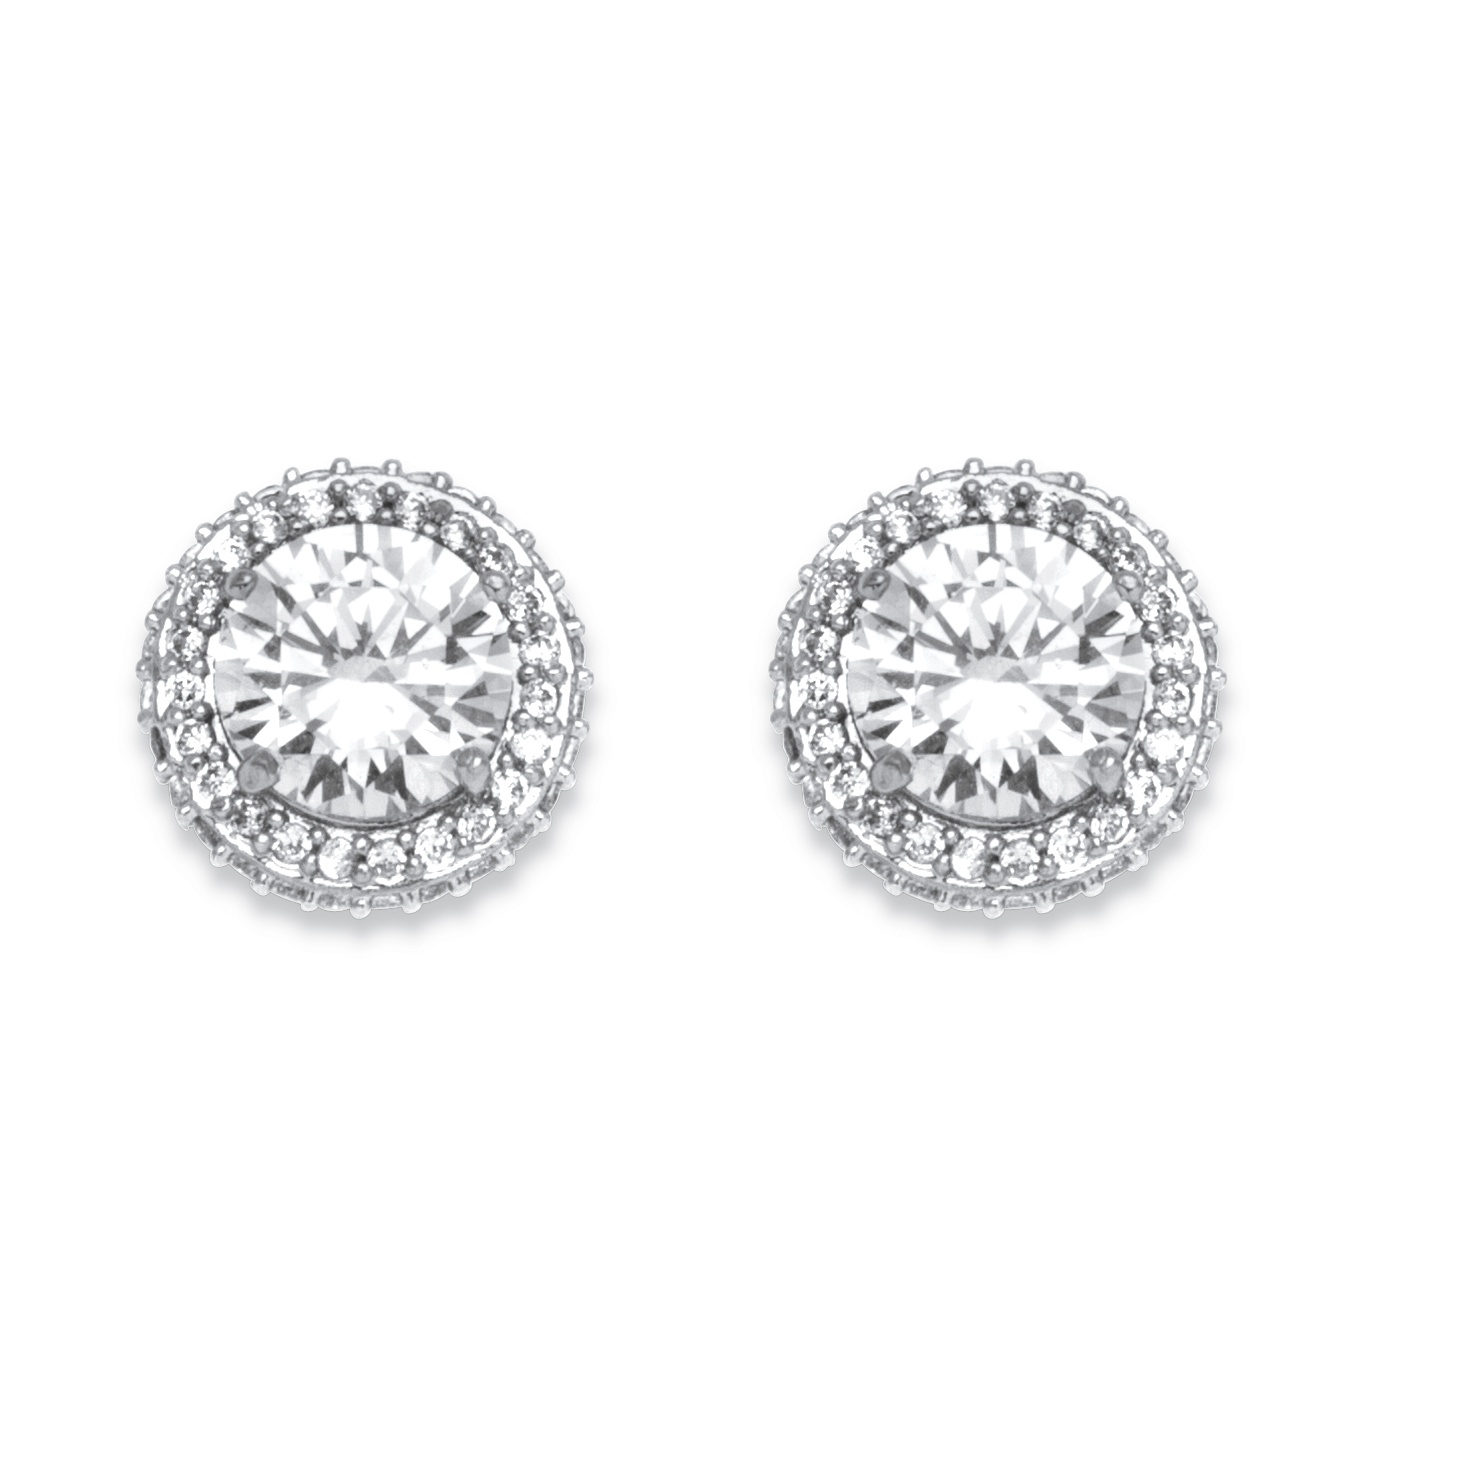 4.91 TCW Cubic Zirconia Stud Earrings Platinum-Plated at PalmBeach Jewelry